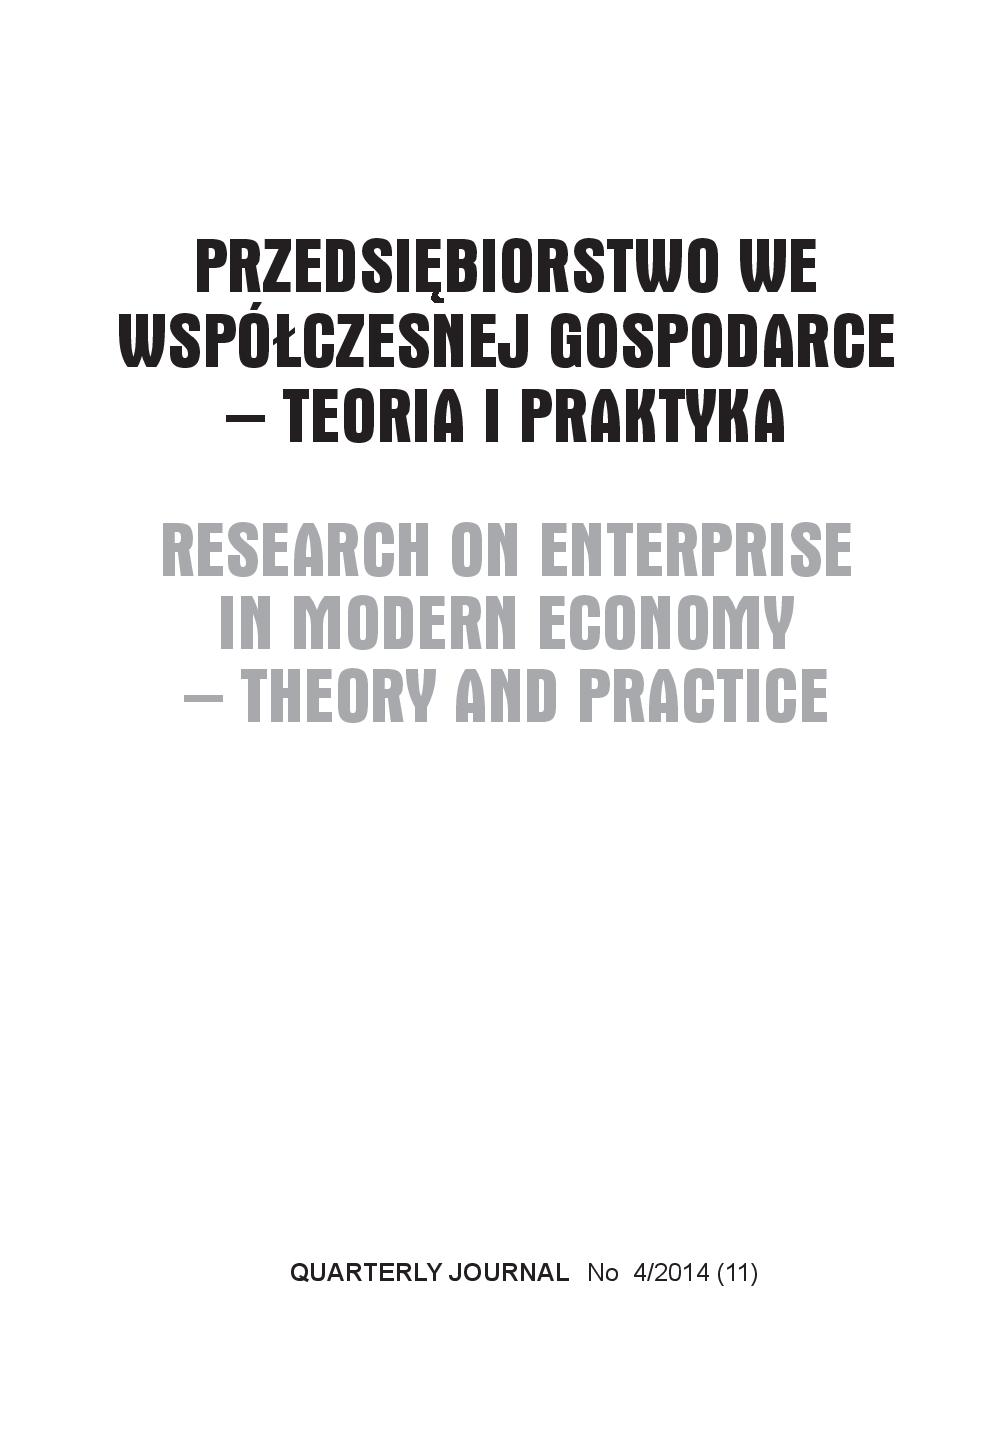 Trends in development of quality management an opportunity for the development of Polish manufacturing and service companies in Poland Cover Image